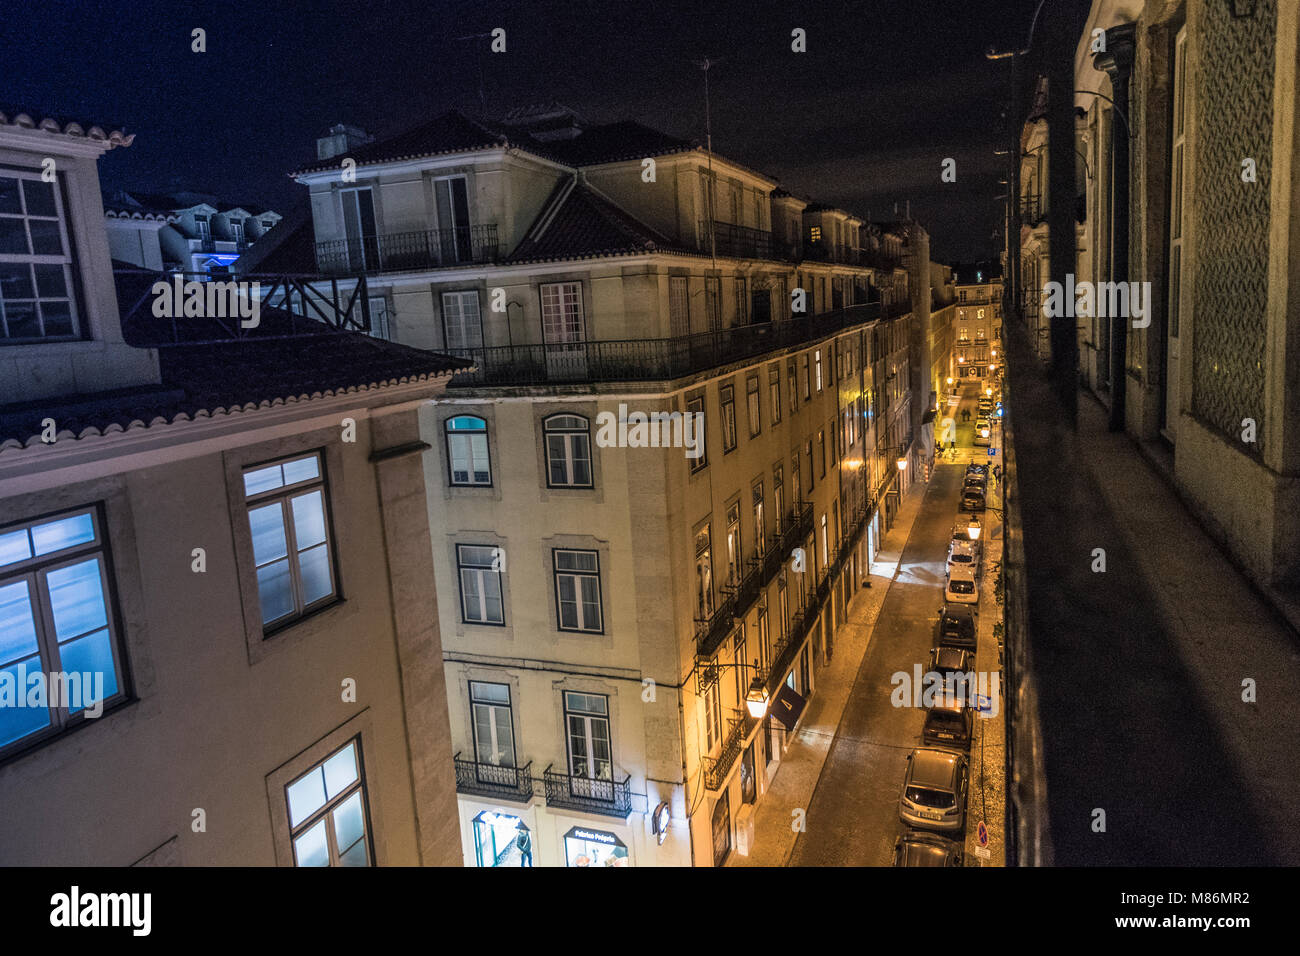 VIEW FROM BALCONY AT OLD CITY OF LISBON AT NIGHT Stock Photo